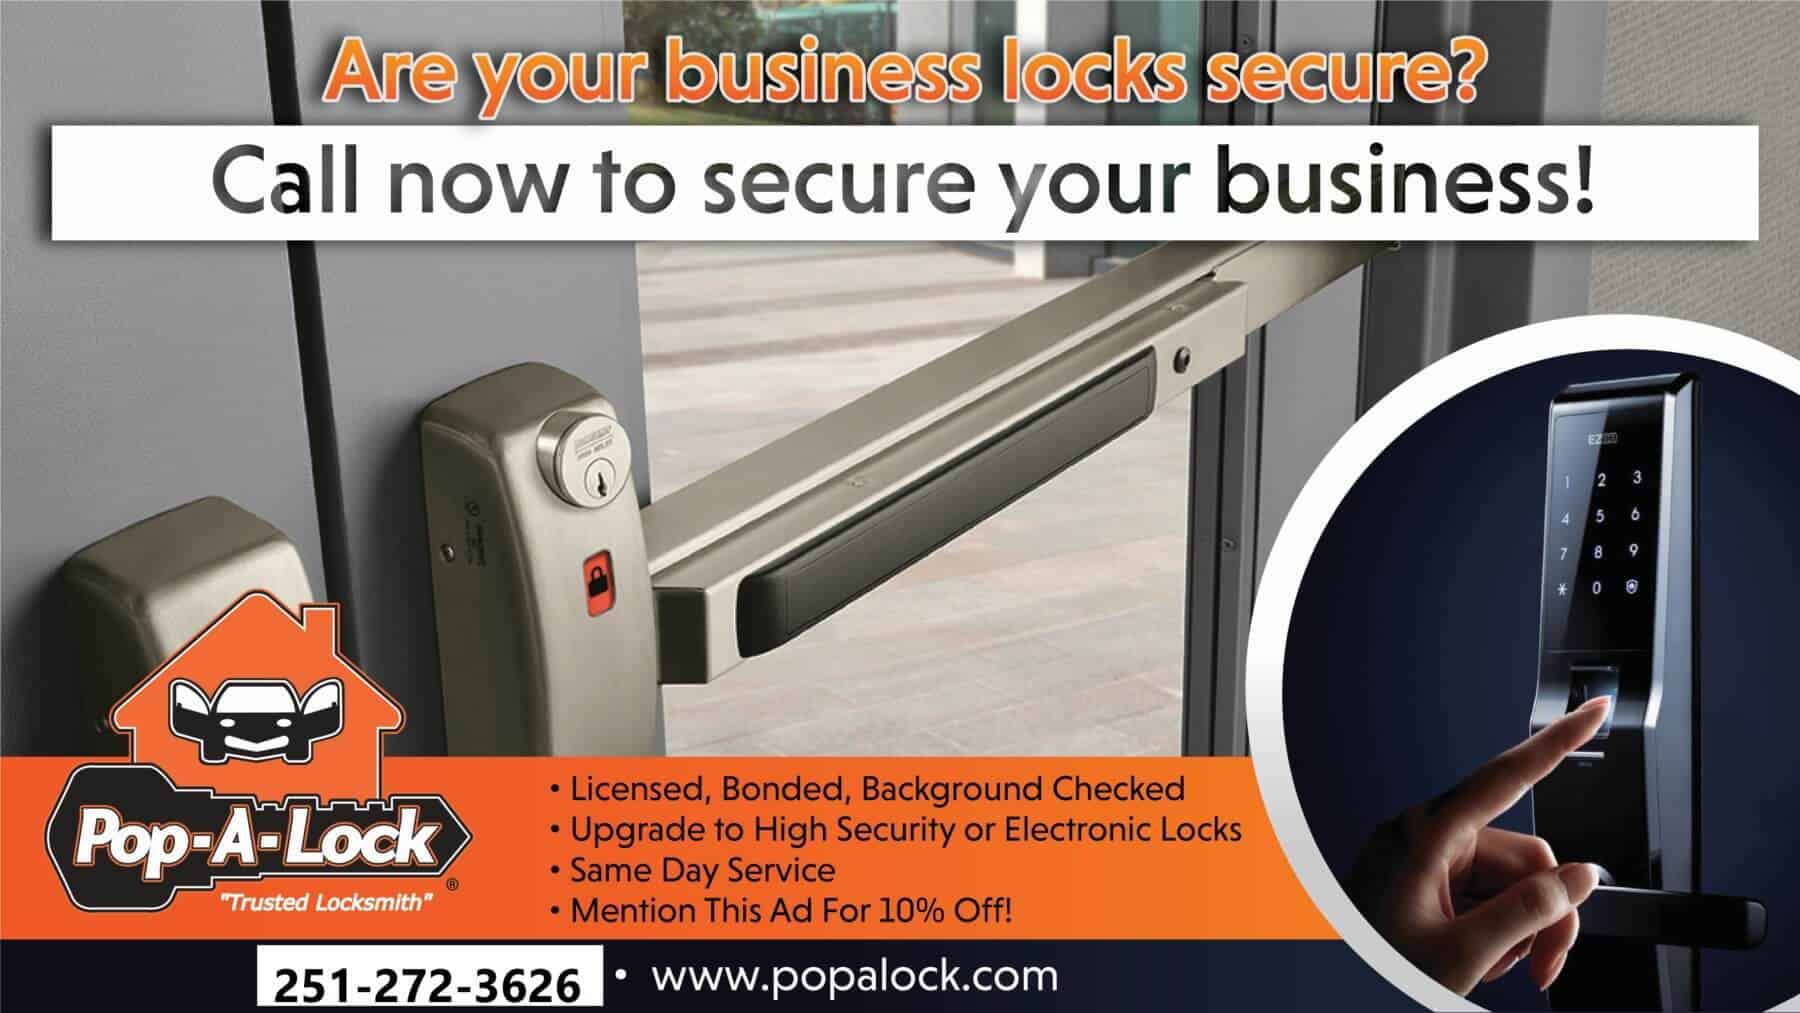 Pop-A-Lock Commercial Secure your business